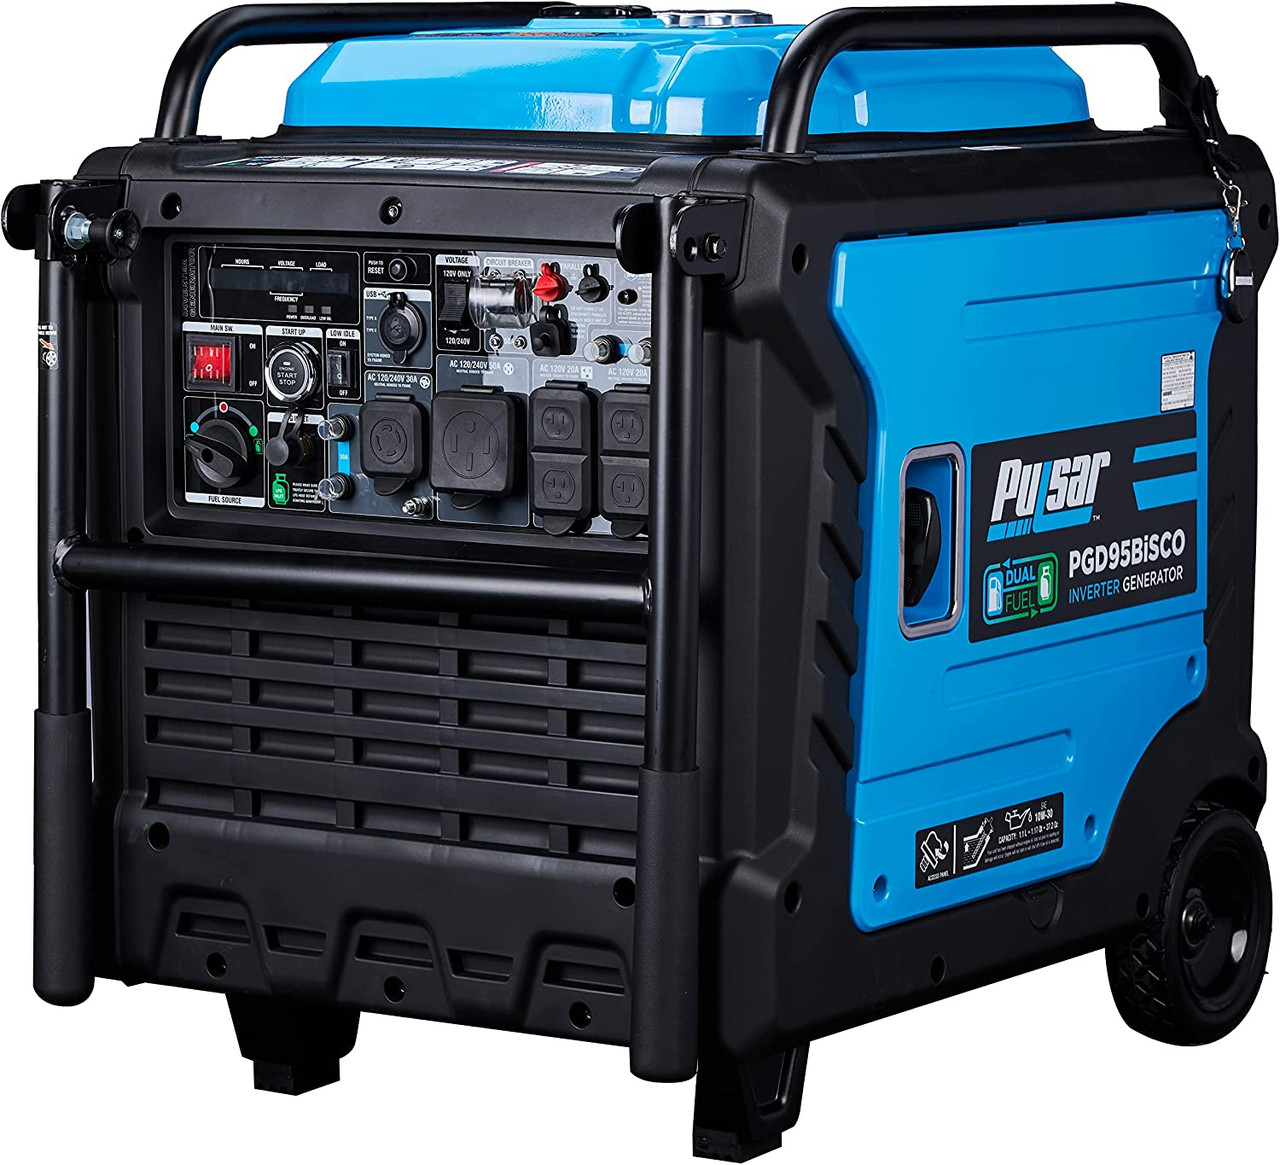 Pulsar Super Quite Dual Fuel 9500W Home Use Portable Inverter Generator With Remote Control and electric start (CO, low battery and low oil Shutoff), RV ready